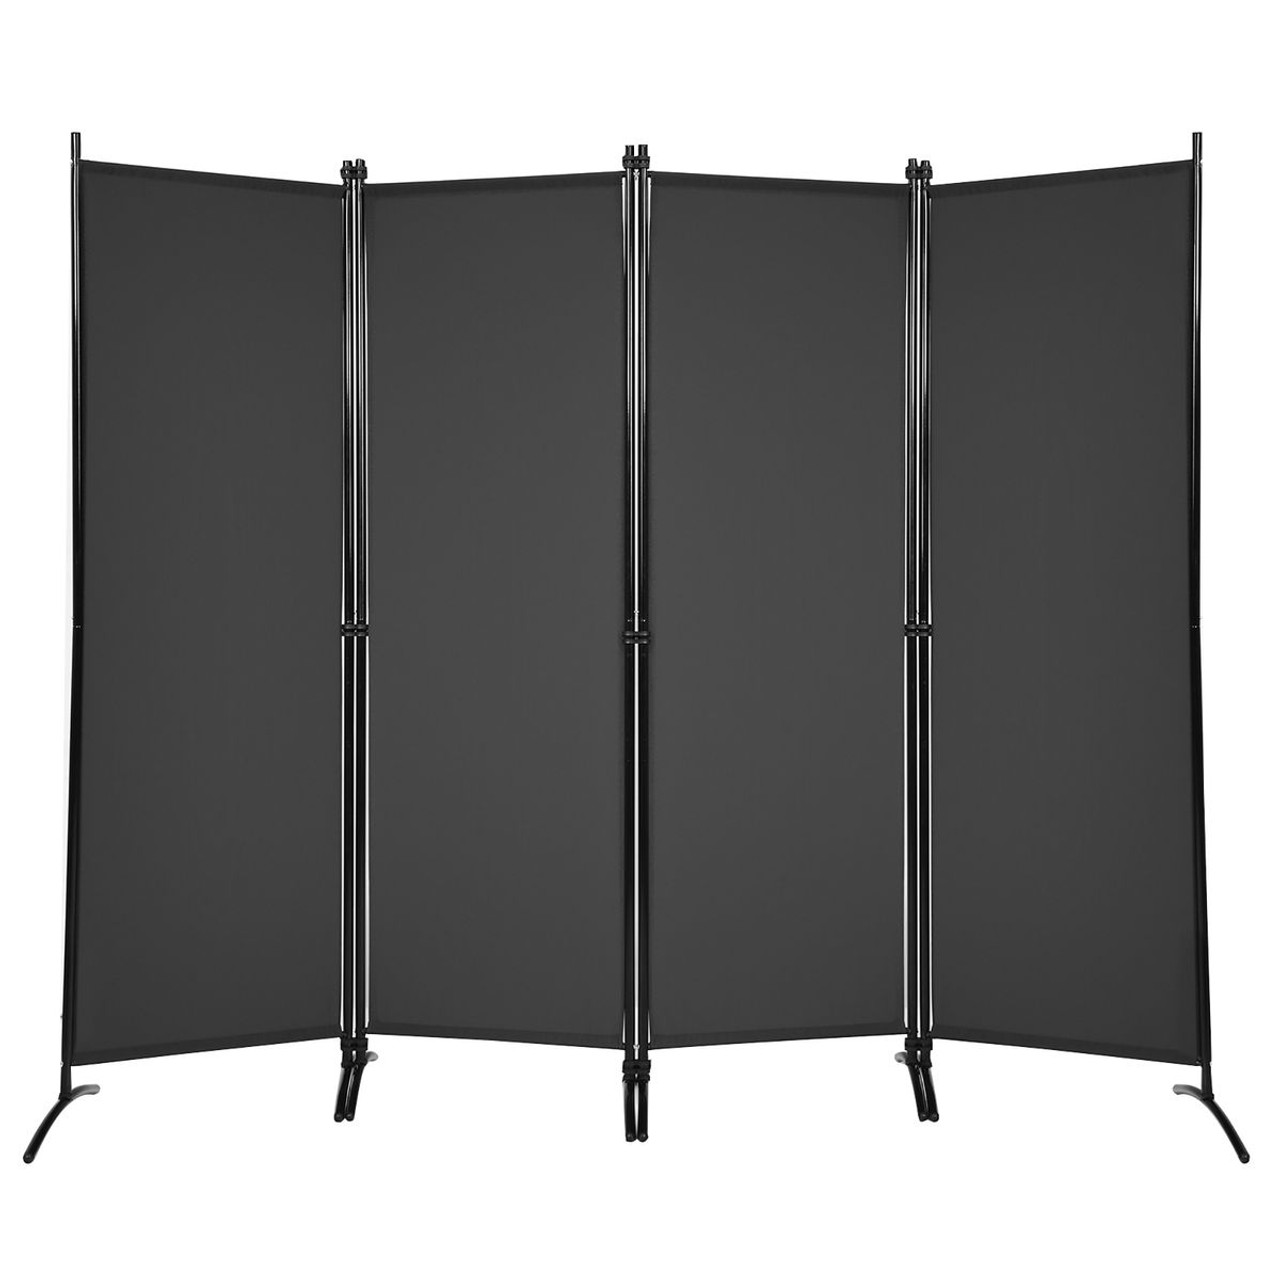 Goplus 4-Panel 5.6ft Room Divider Folding Fabric Privacy Screen product image